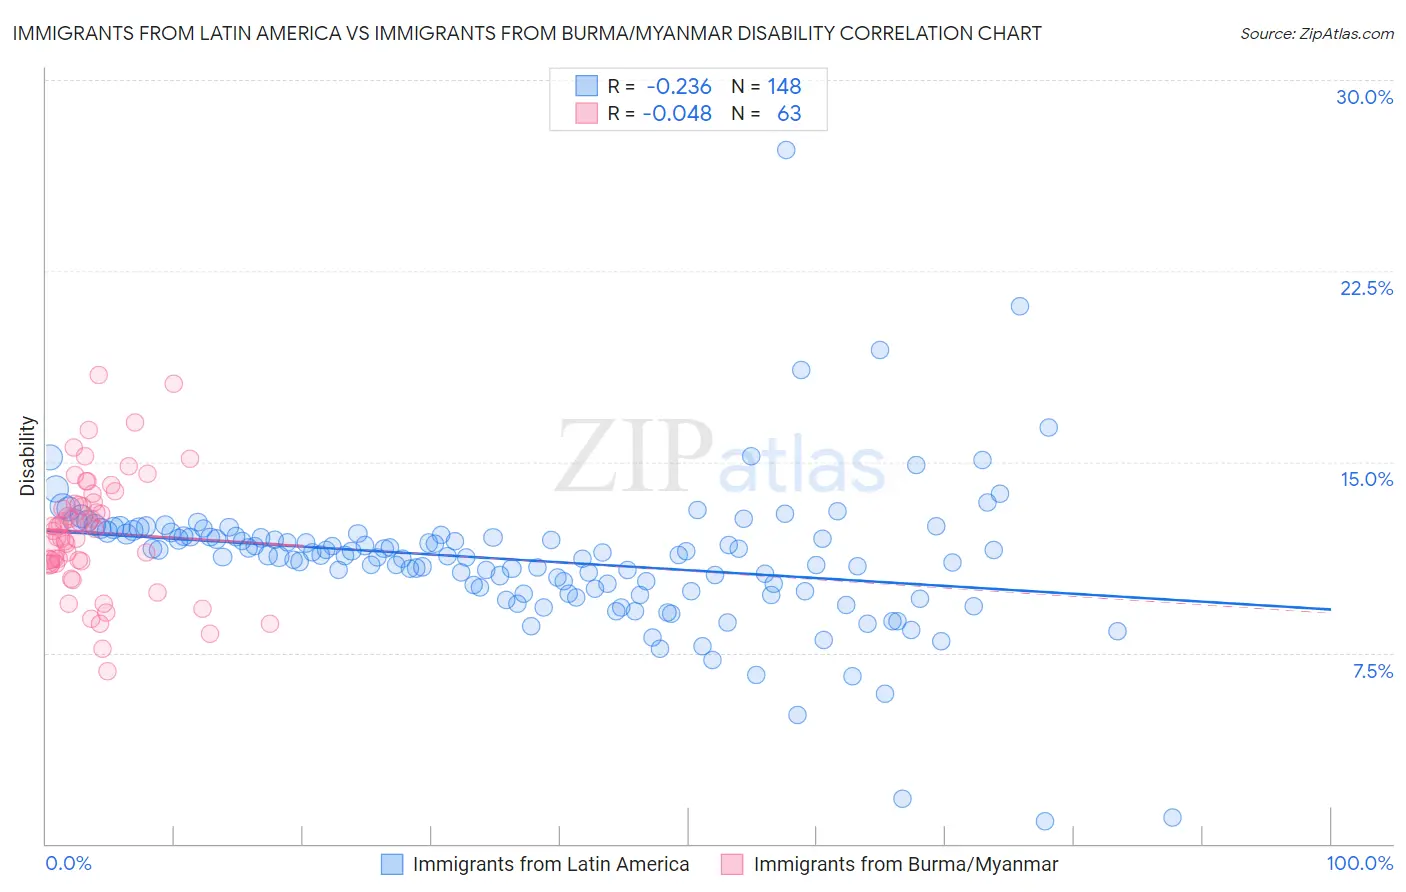 Immigrants from Latin America vs Immigrants from Burma/Myanmar Disability